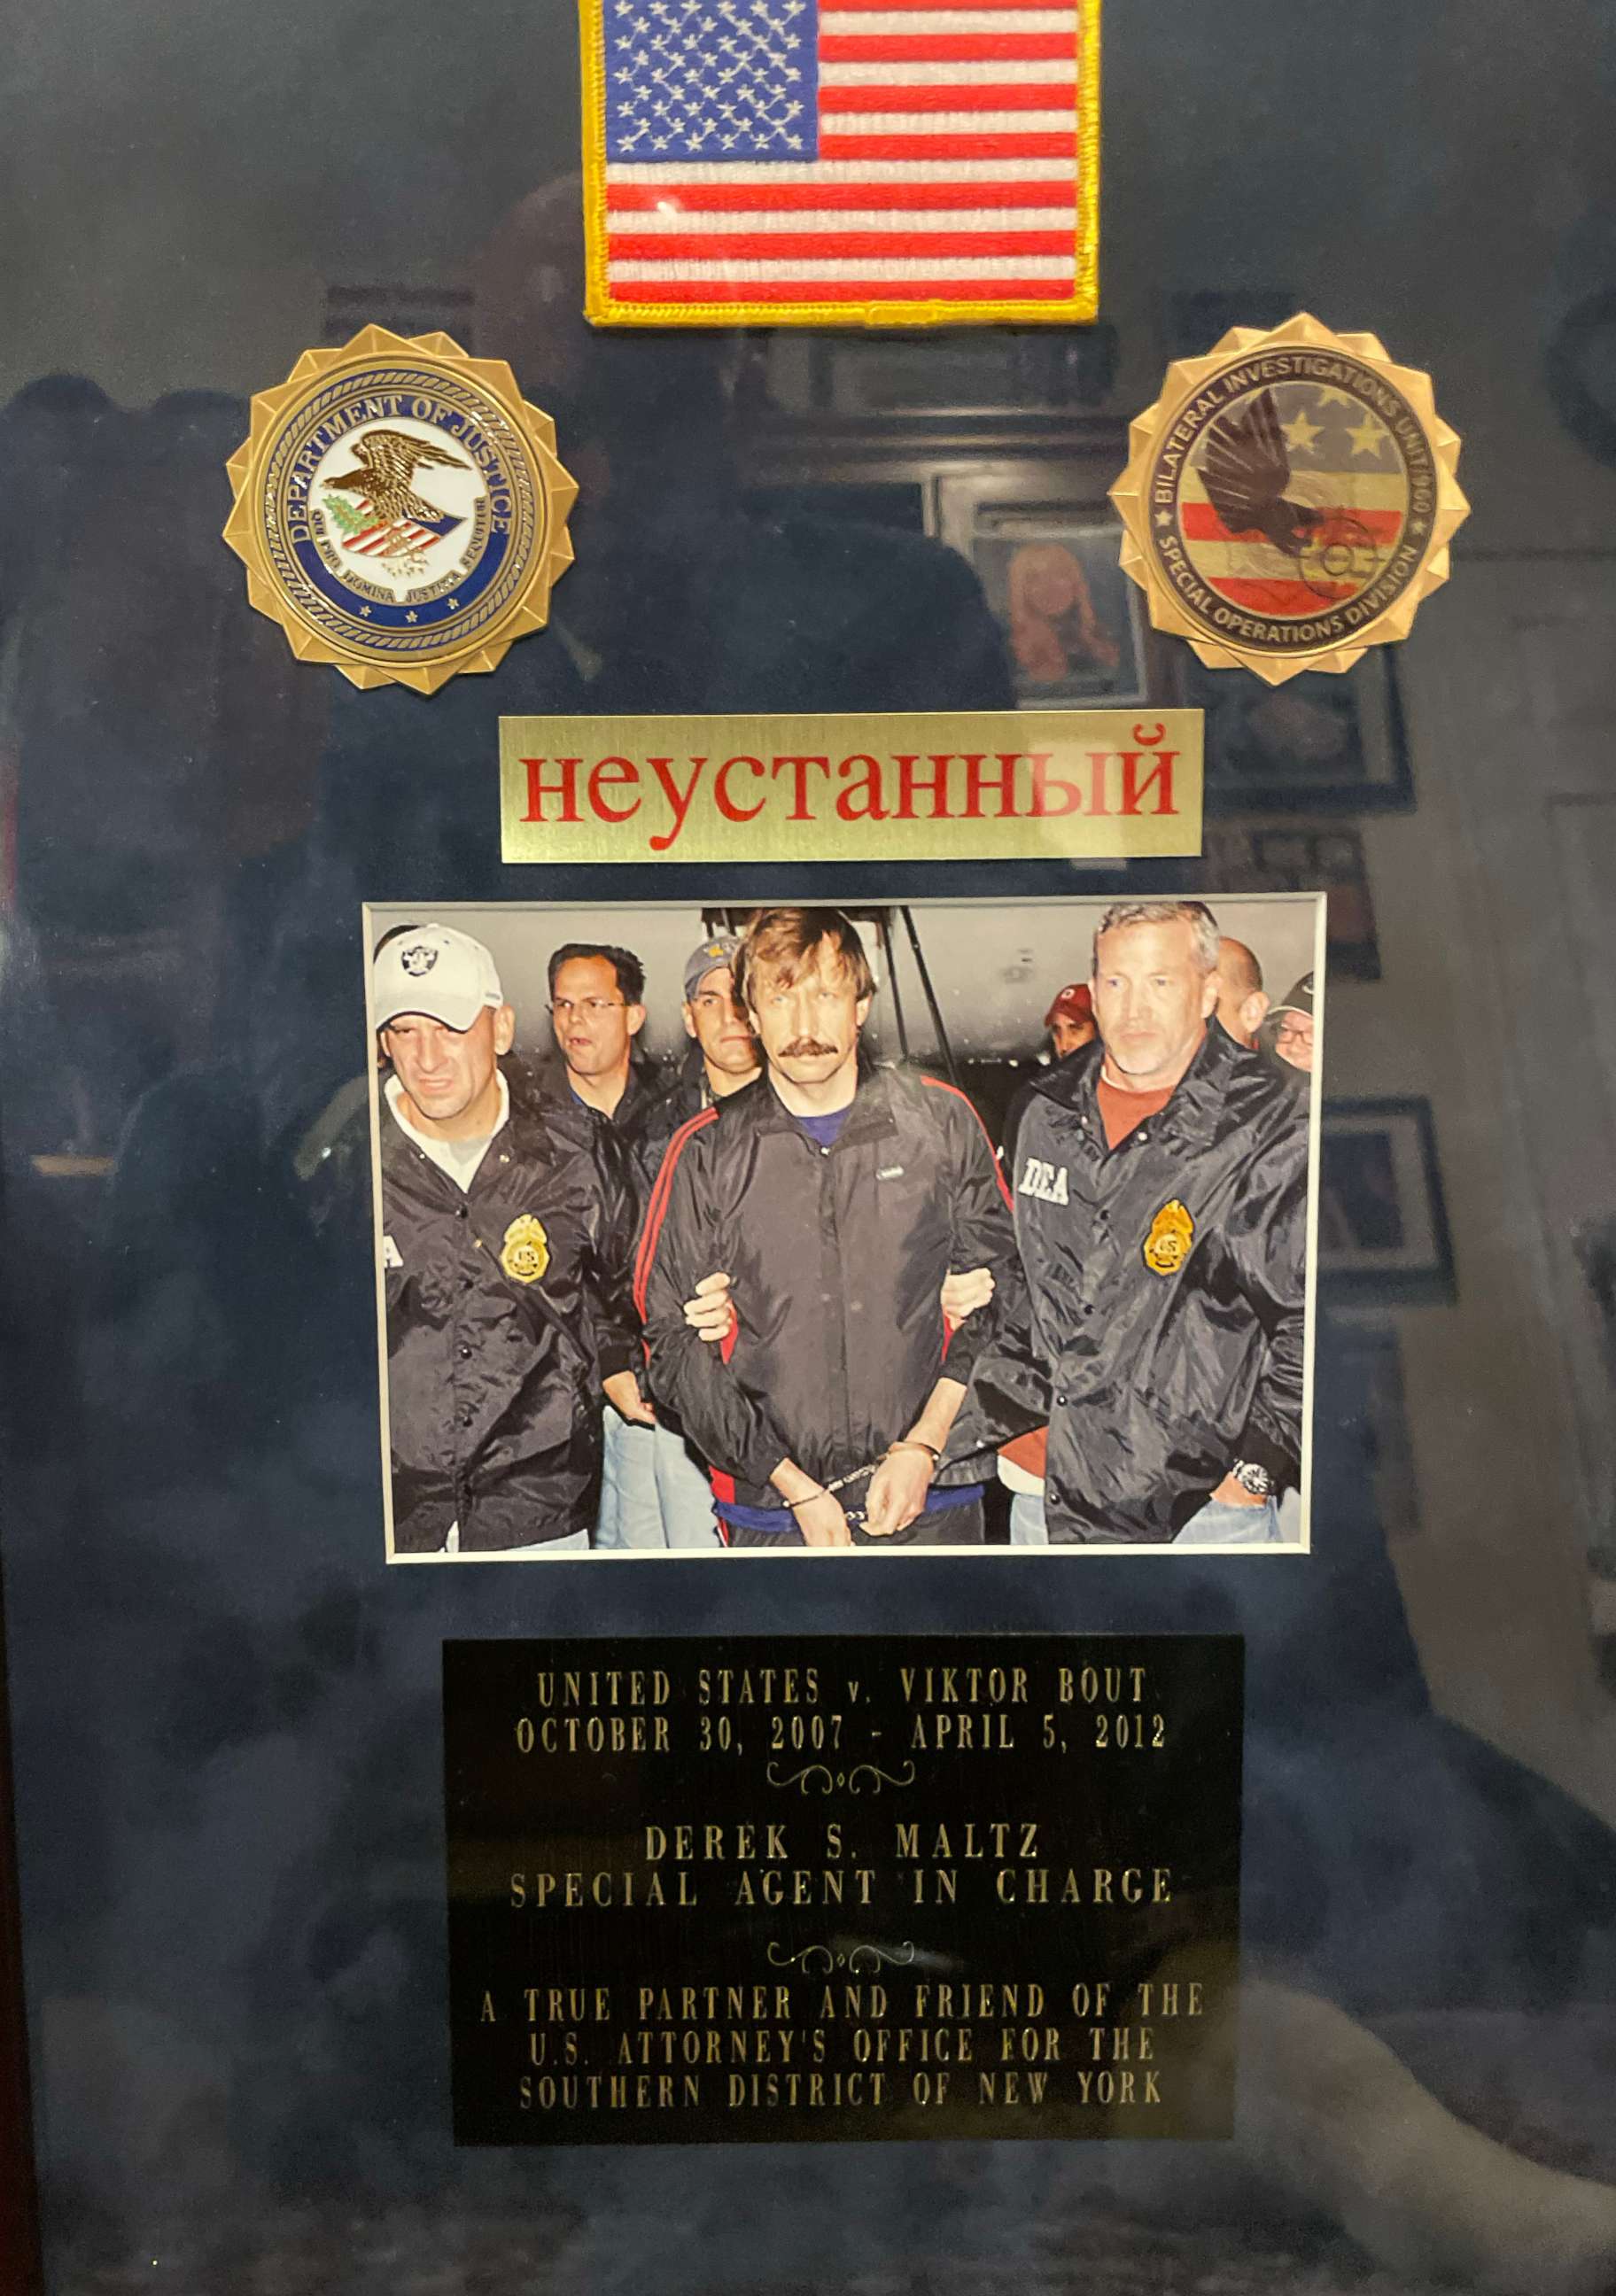 PHOTO: A plaque given to Special Agent Derek Maltz after the arrest of Viktor Bout.